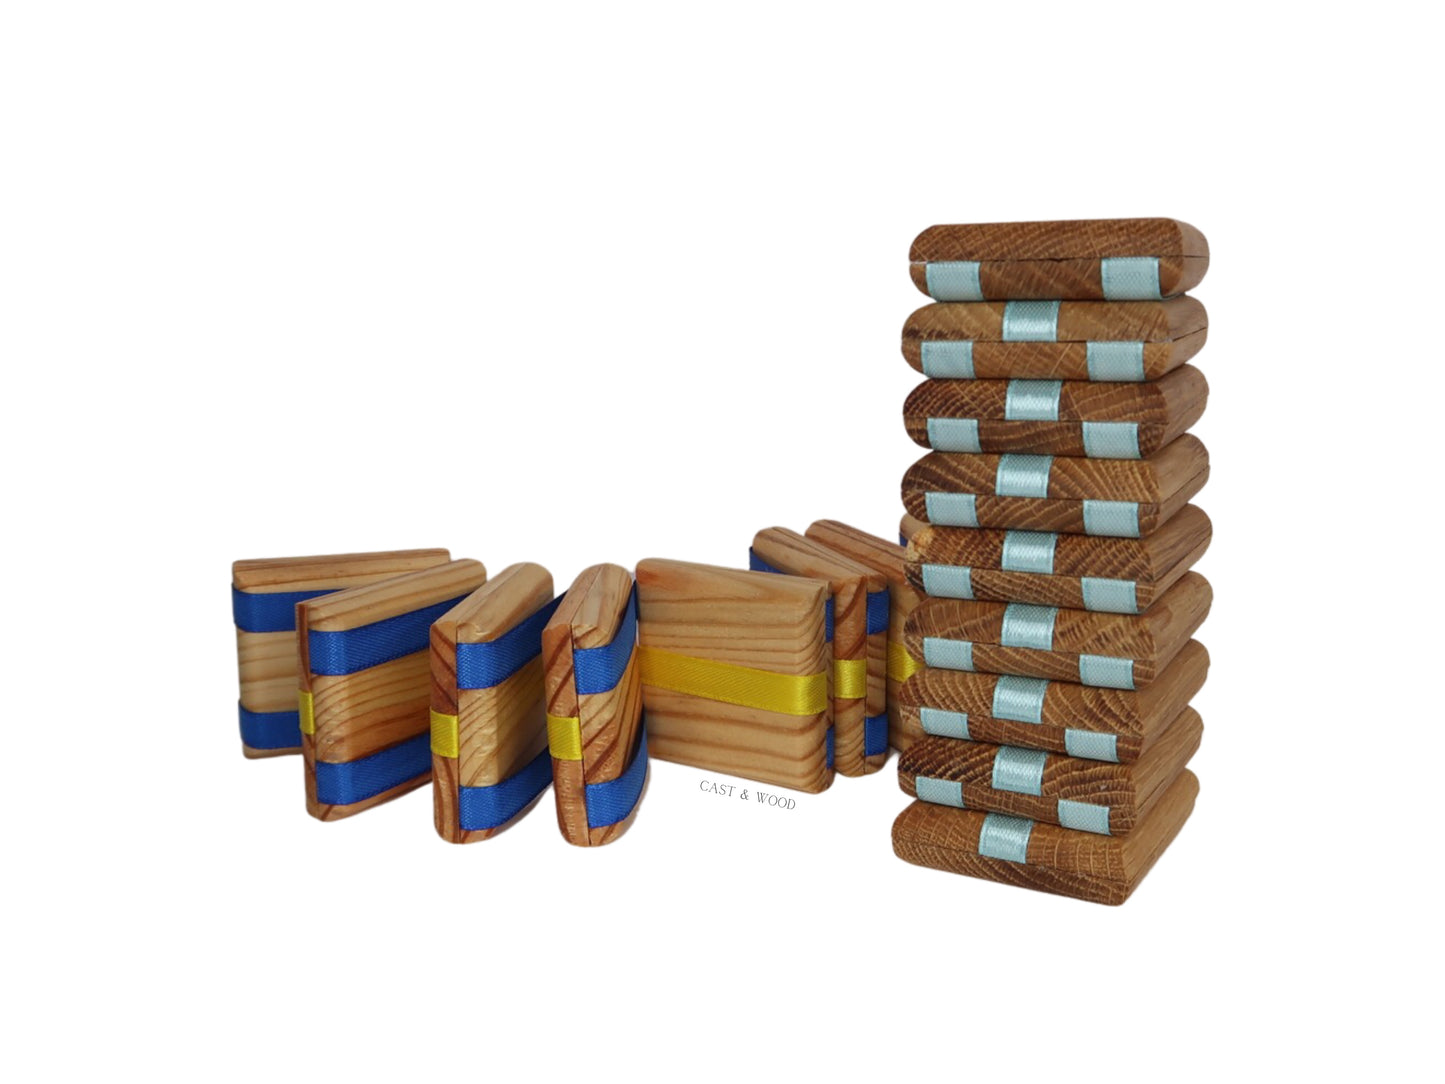 Jacobs Ladder Wooden Toy